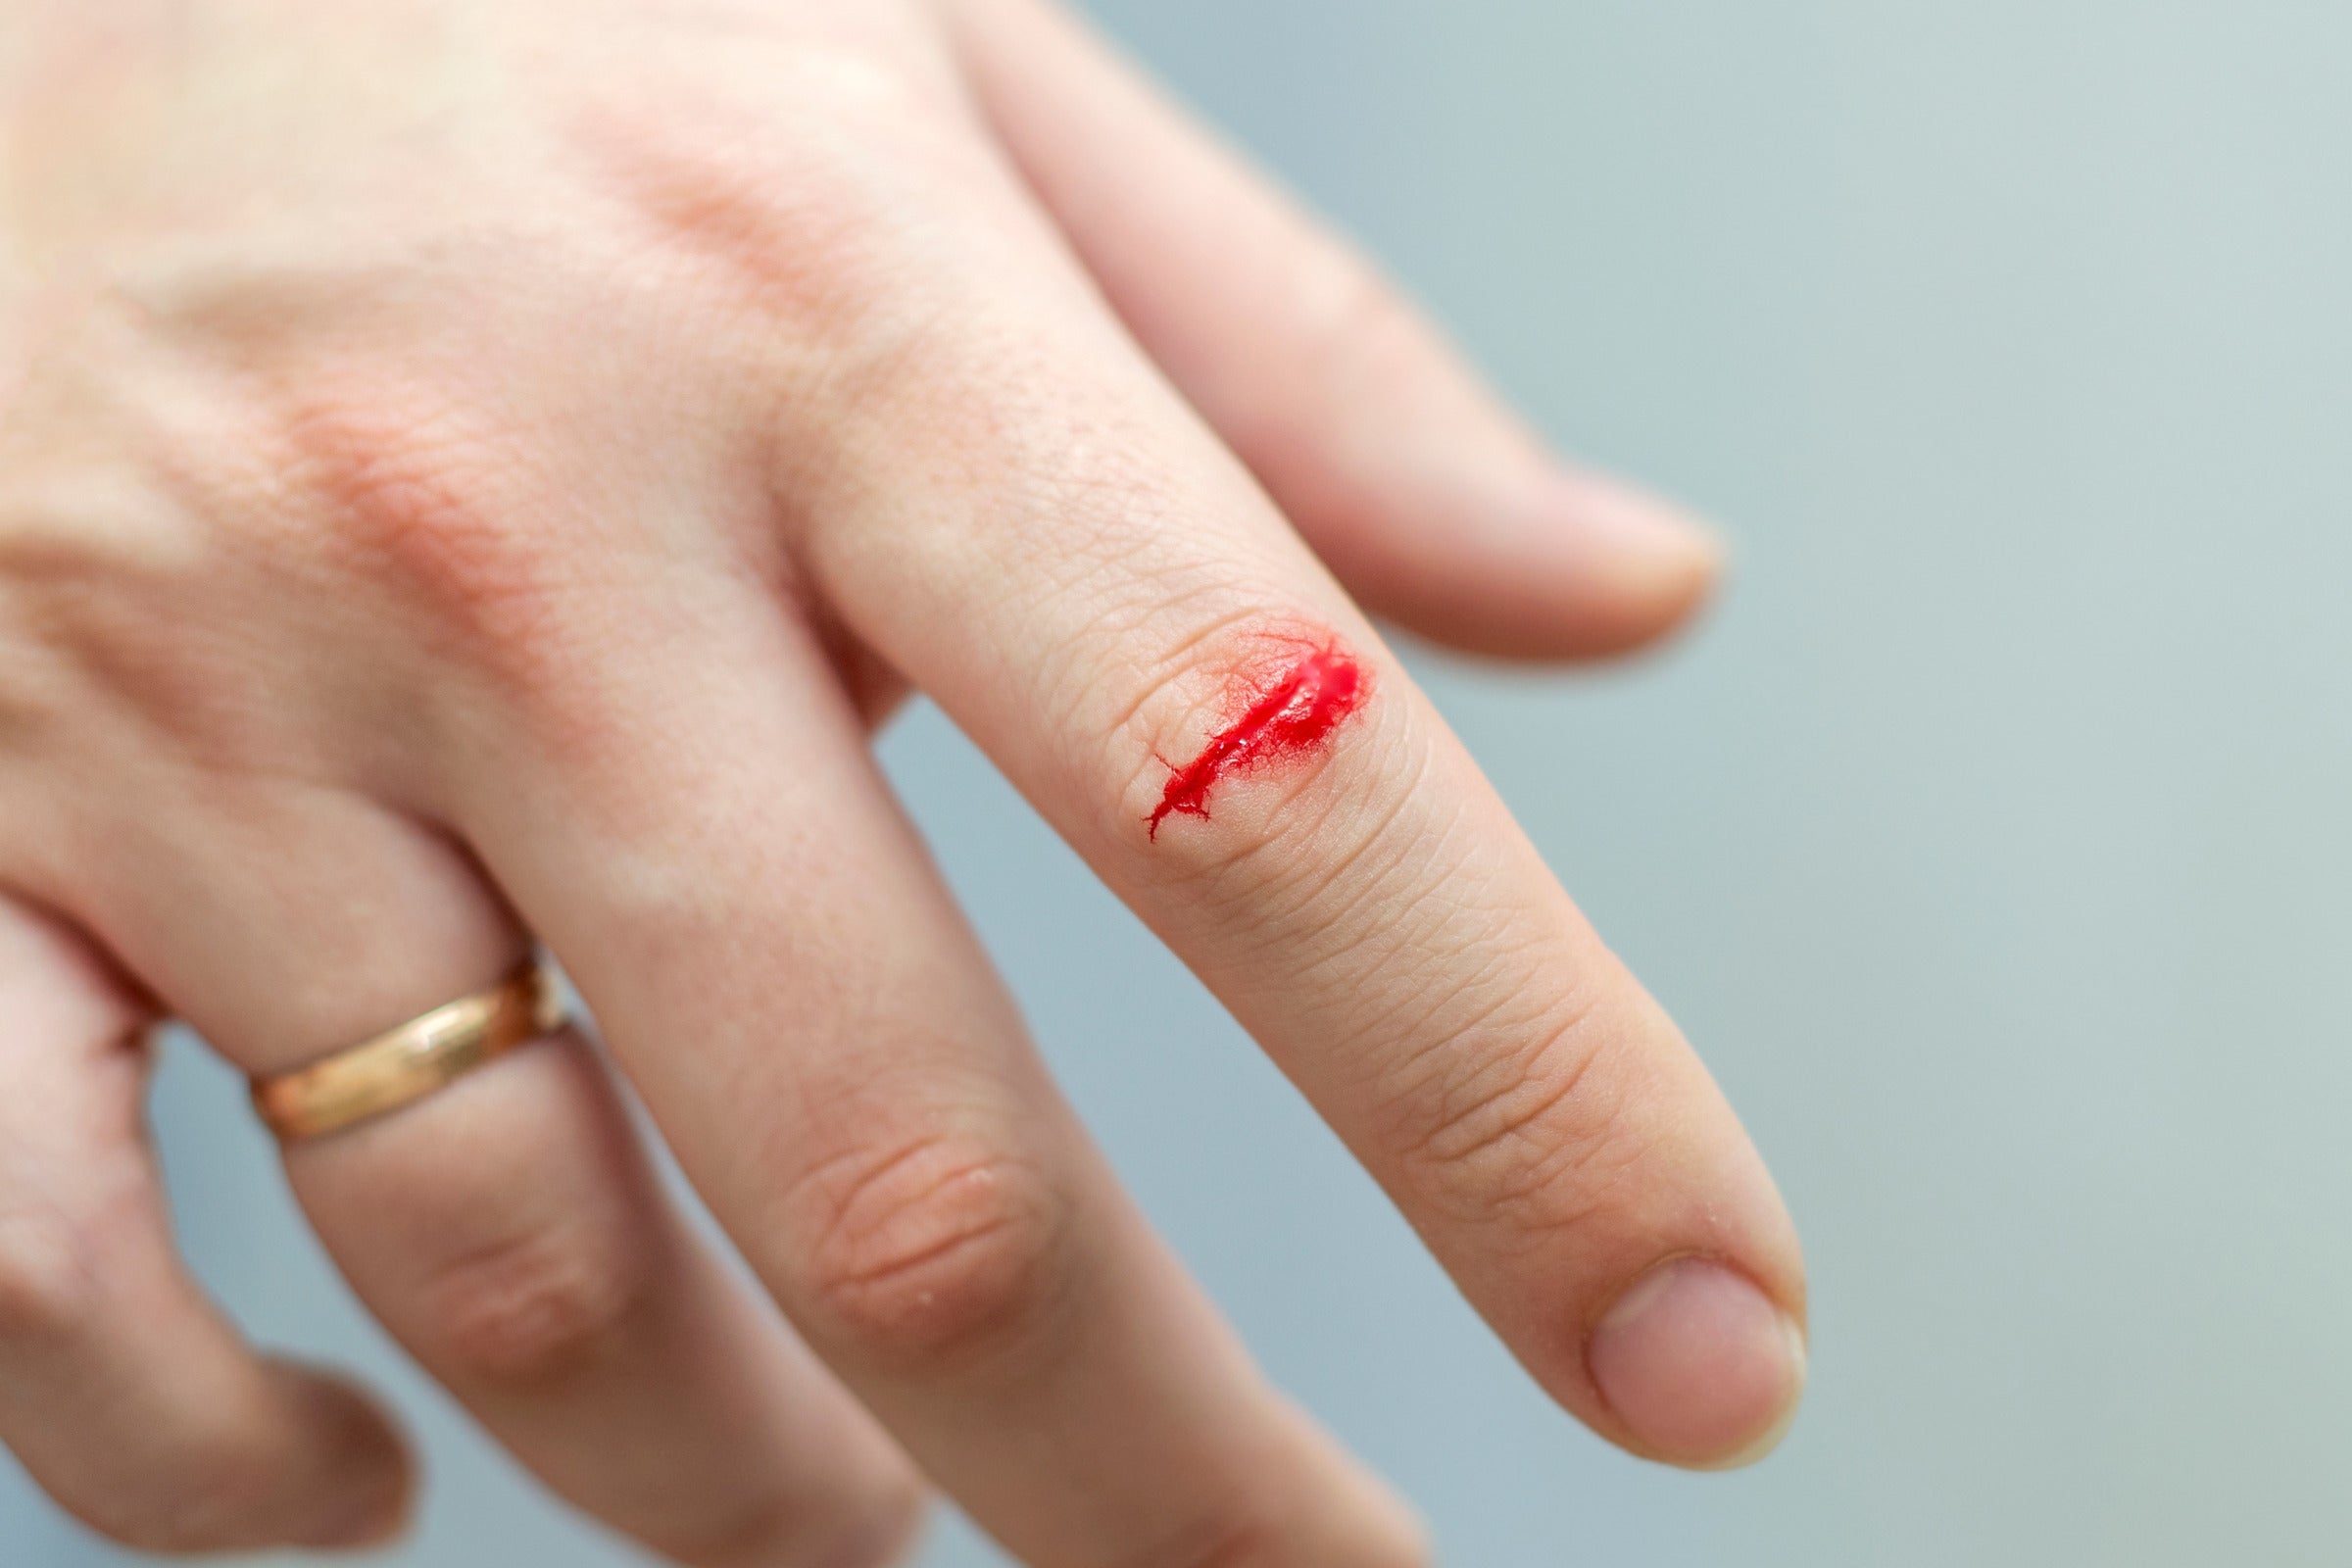 The 5 Risks of Improperly Cleaning Stab Wounds